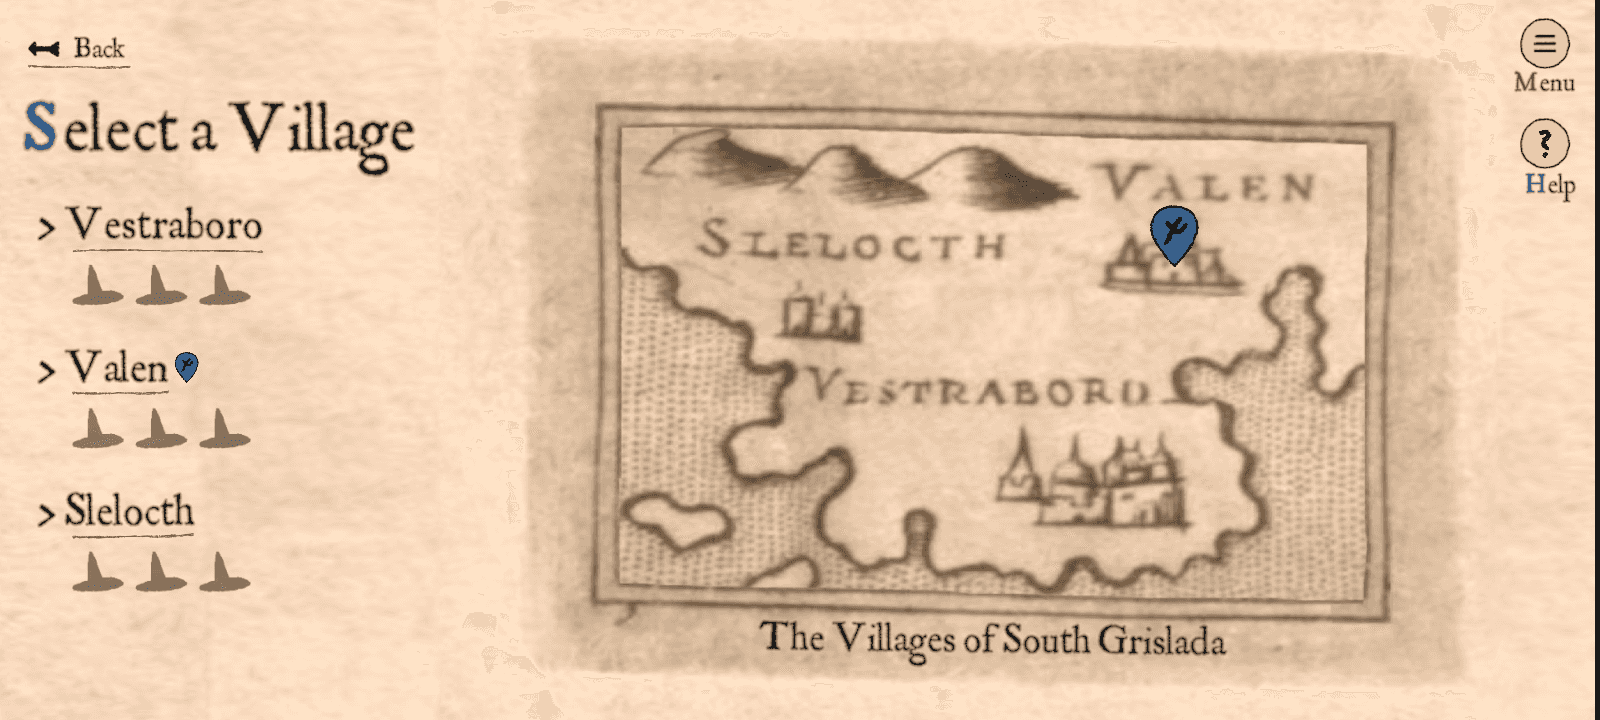 A screenshot from Which is Witch depicting the map screen. Large text is displayed in the top left corner that says: Select a Village. Three button options sit below with the text of Vestraboro, Valen, and Slelcoth. On the right side of the screen is a very rudimentary map depicting small towns for each of these three villages as well as a locational marker on Valen to show where the player currently is.